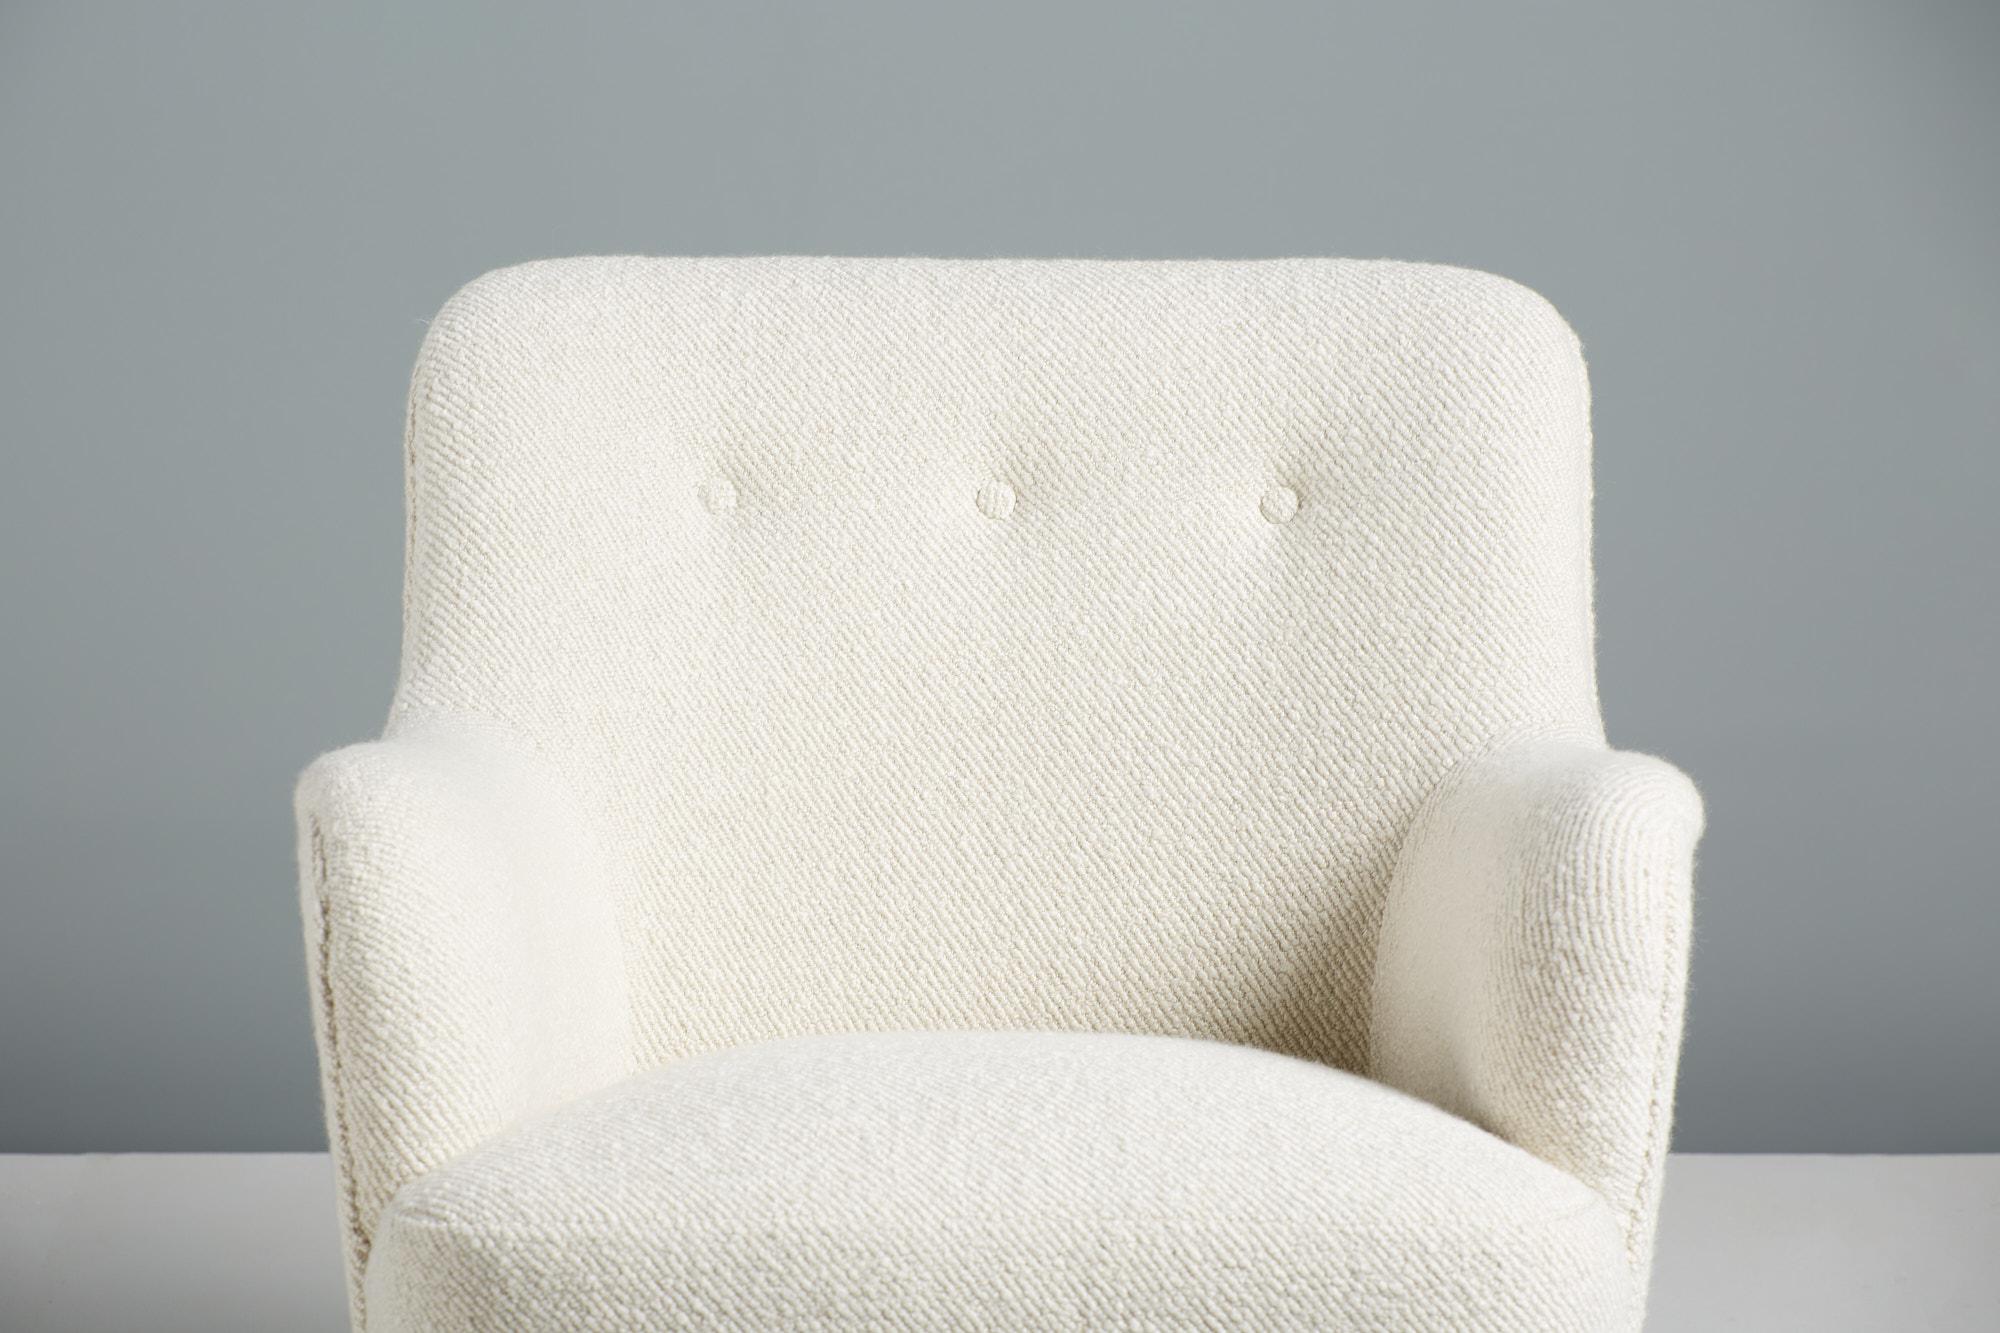 Peter Hvidt - Model 1748 Lounge Chair

A pair of compact lounge chairs produced by Fritz Hansen in Denmark c1940s and designed by Danish icon Peter Hvidt. The chairs have been reupholstered in exquisite wool blend boucle fabric from Dedar Milan. 